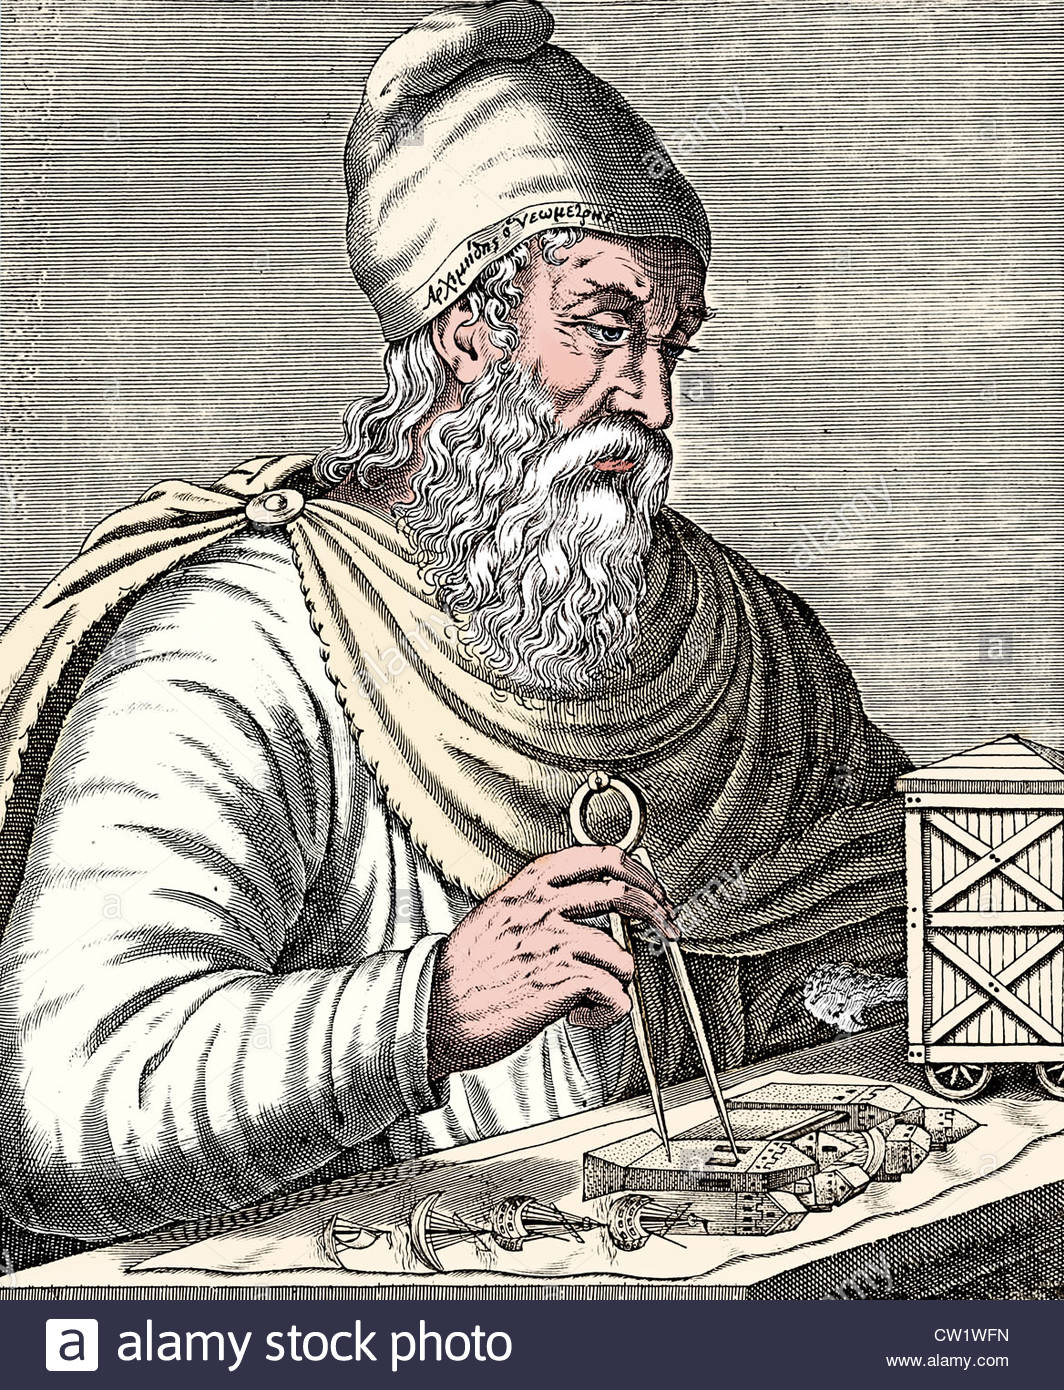 Archimedes Images Wallpapers